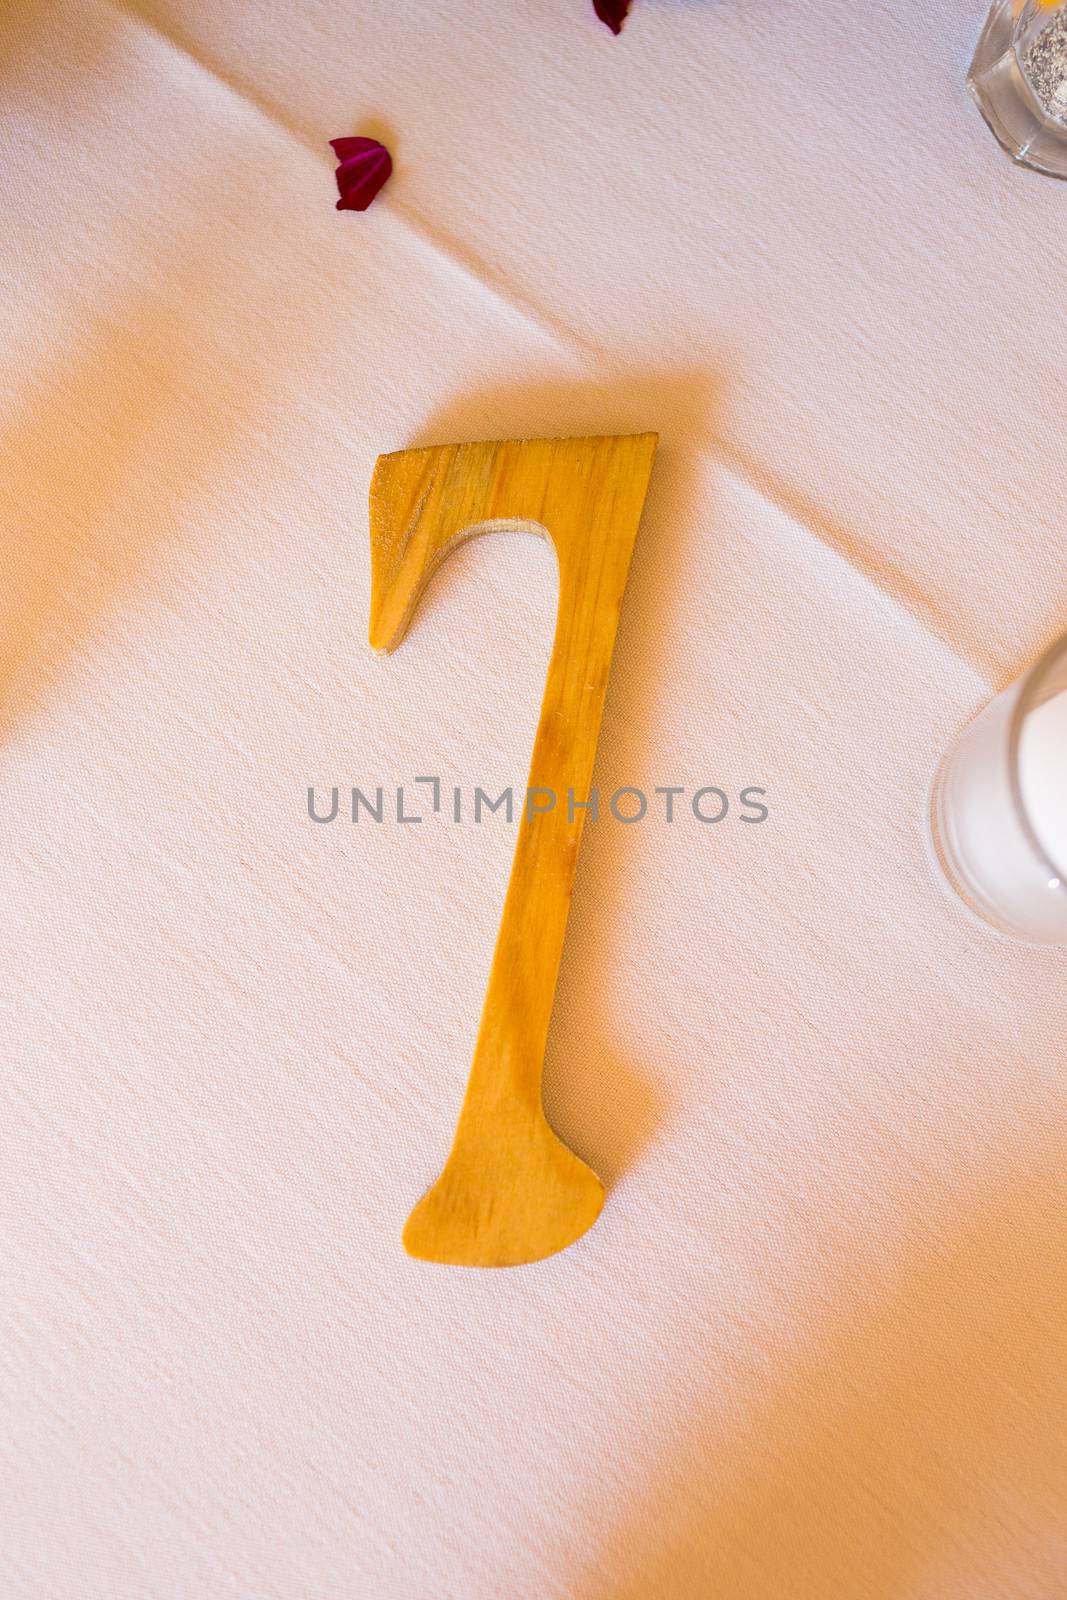 A wooden number 7 or seven is carved out of the wood at a wedding.